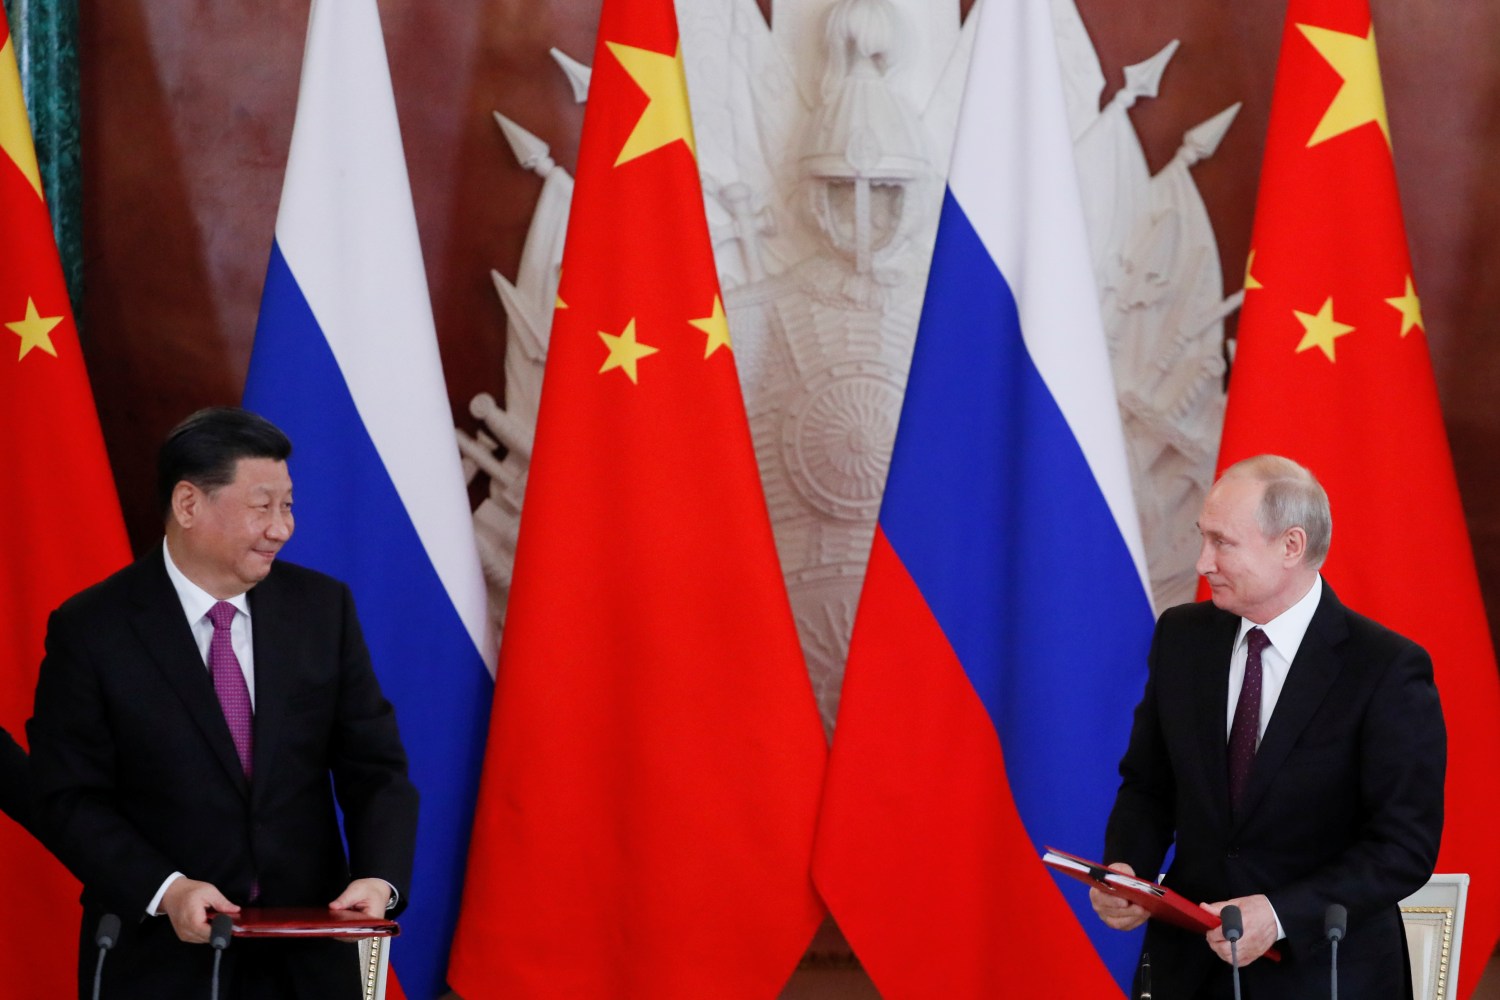 Russian President Vladimir Putin and his Chinese counterpart Xi Jinping look on during a signing ceremony in Moscow, Russia, June 5, 2019. REUTERS/Evgenia Novozhenina